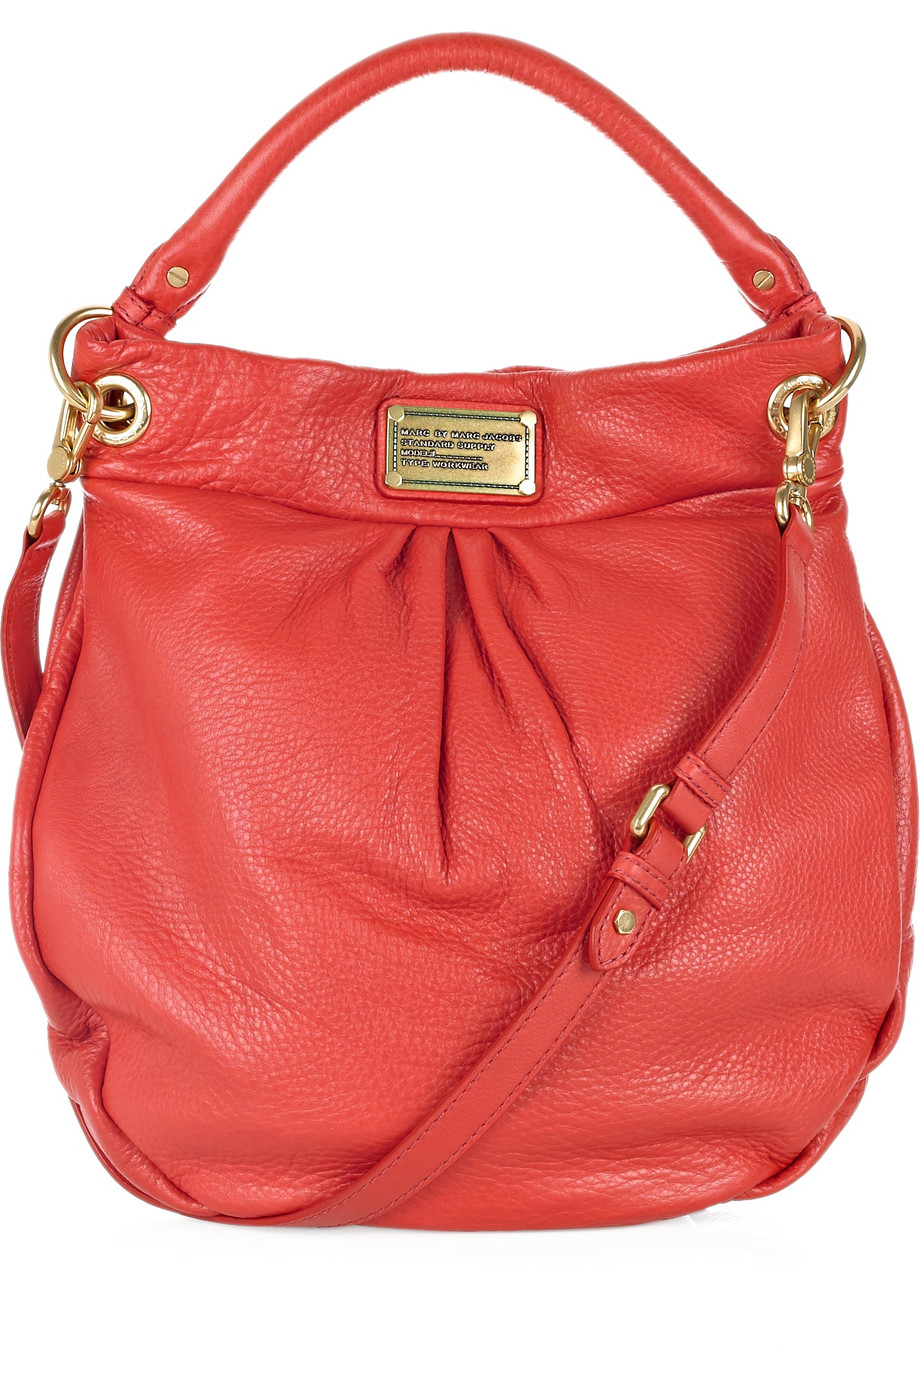 Marc By Marc Jacobs Hillier Hobo Leather Shoulder Bag in Red - Lyst